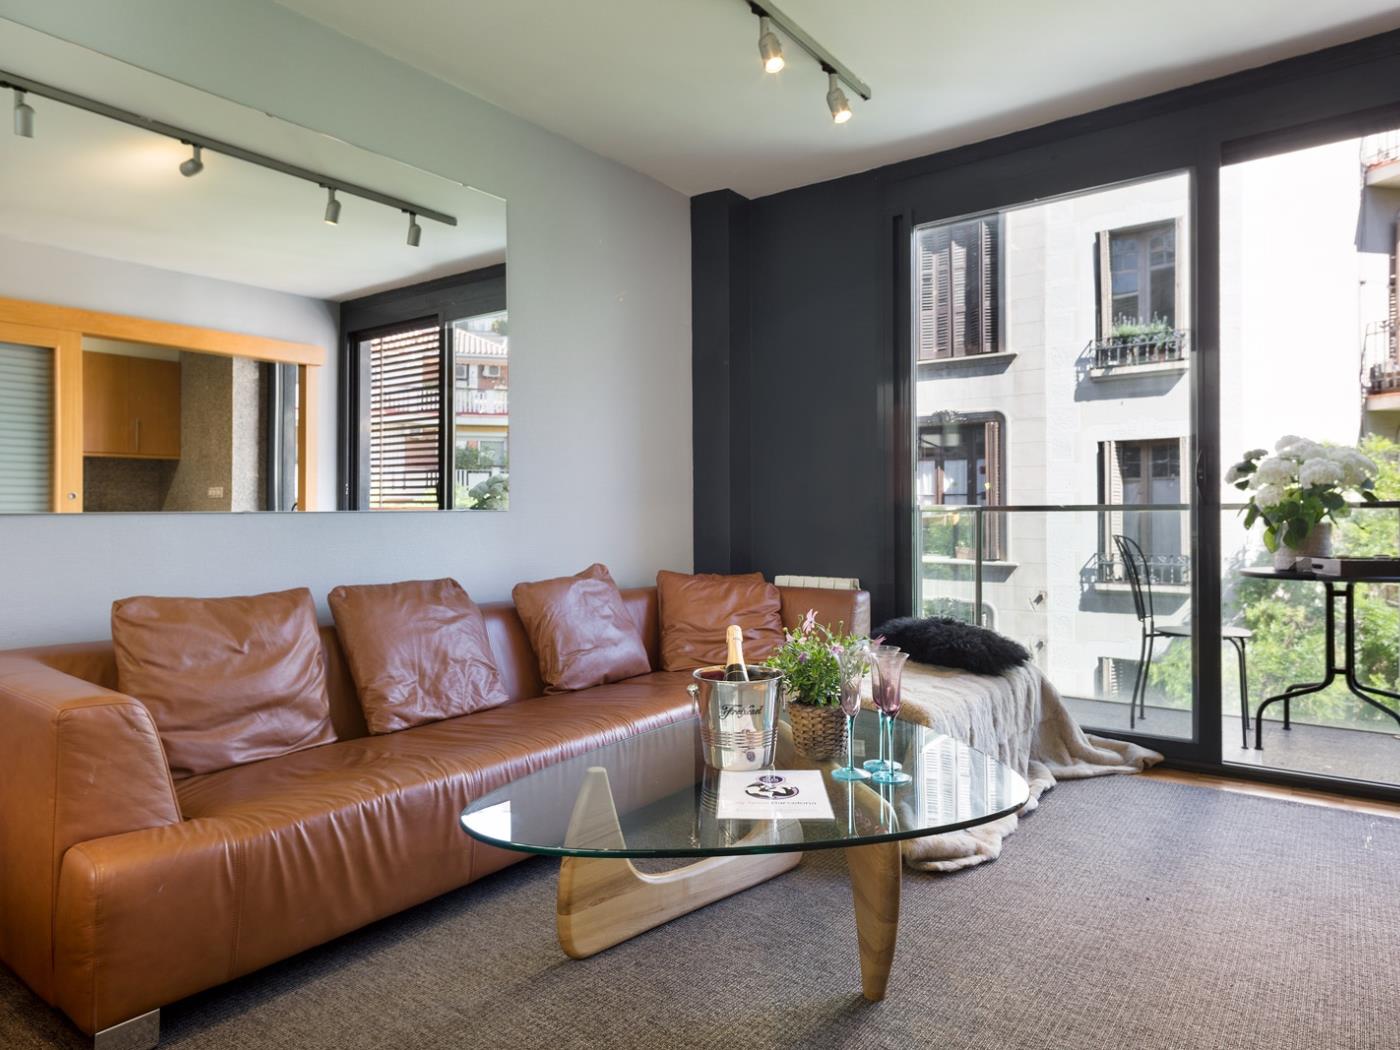 6 apartments in Barcelona city centre for up to 36 pax with small terrace each - My Space Barcelona Apartments